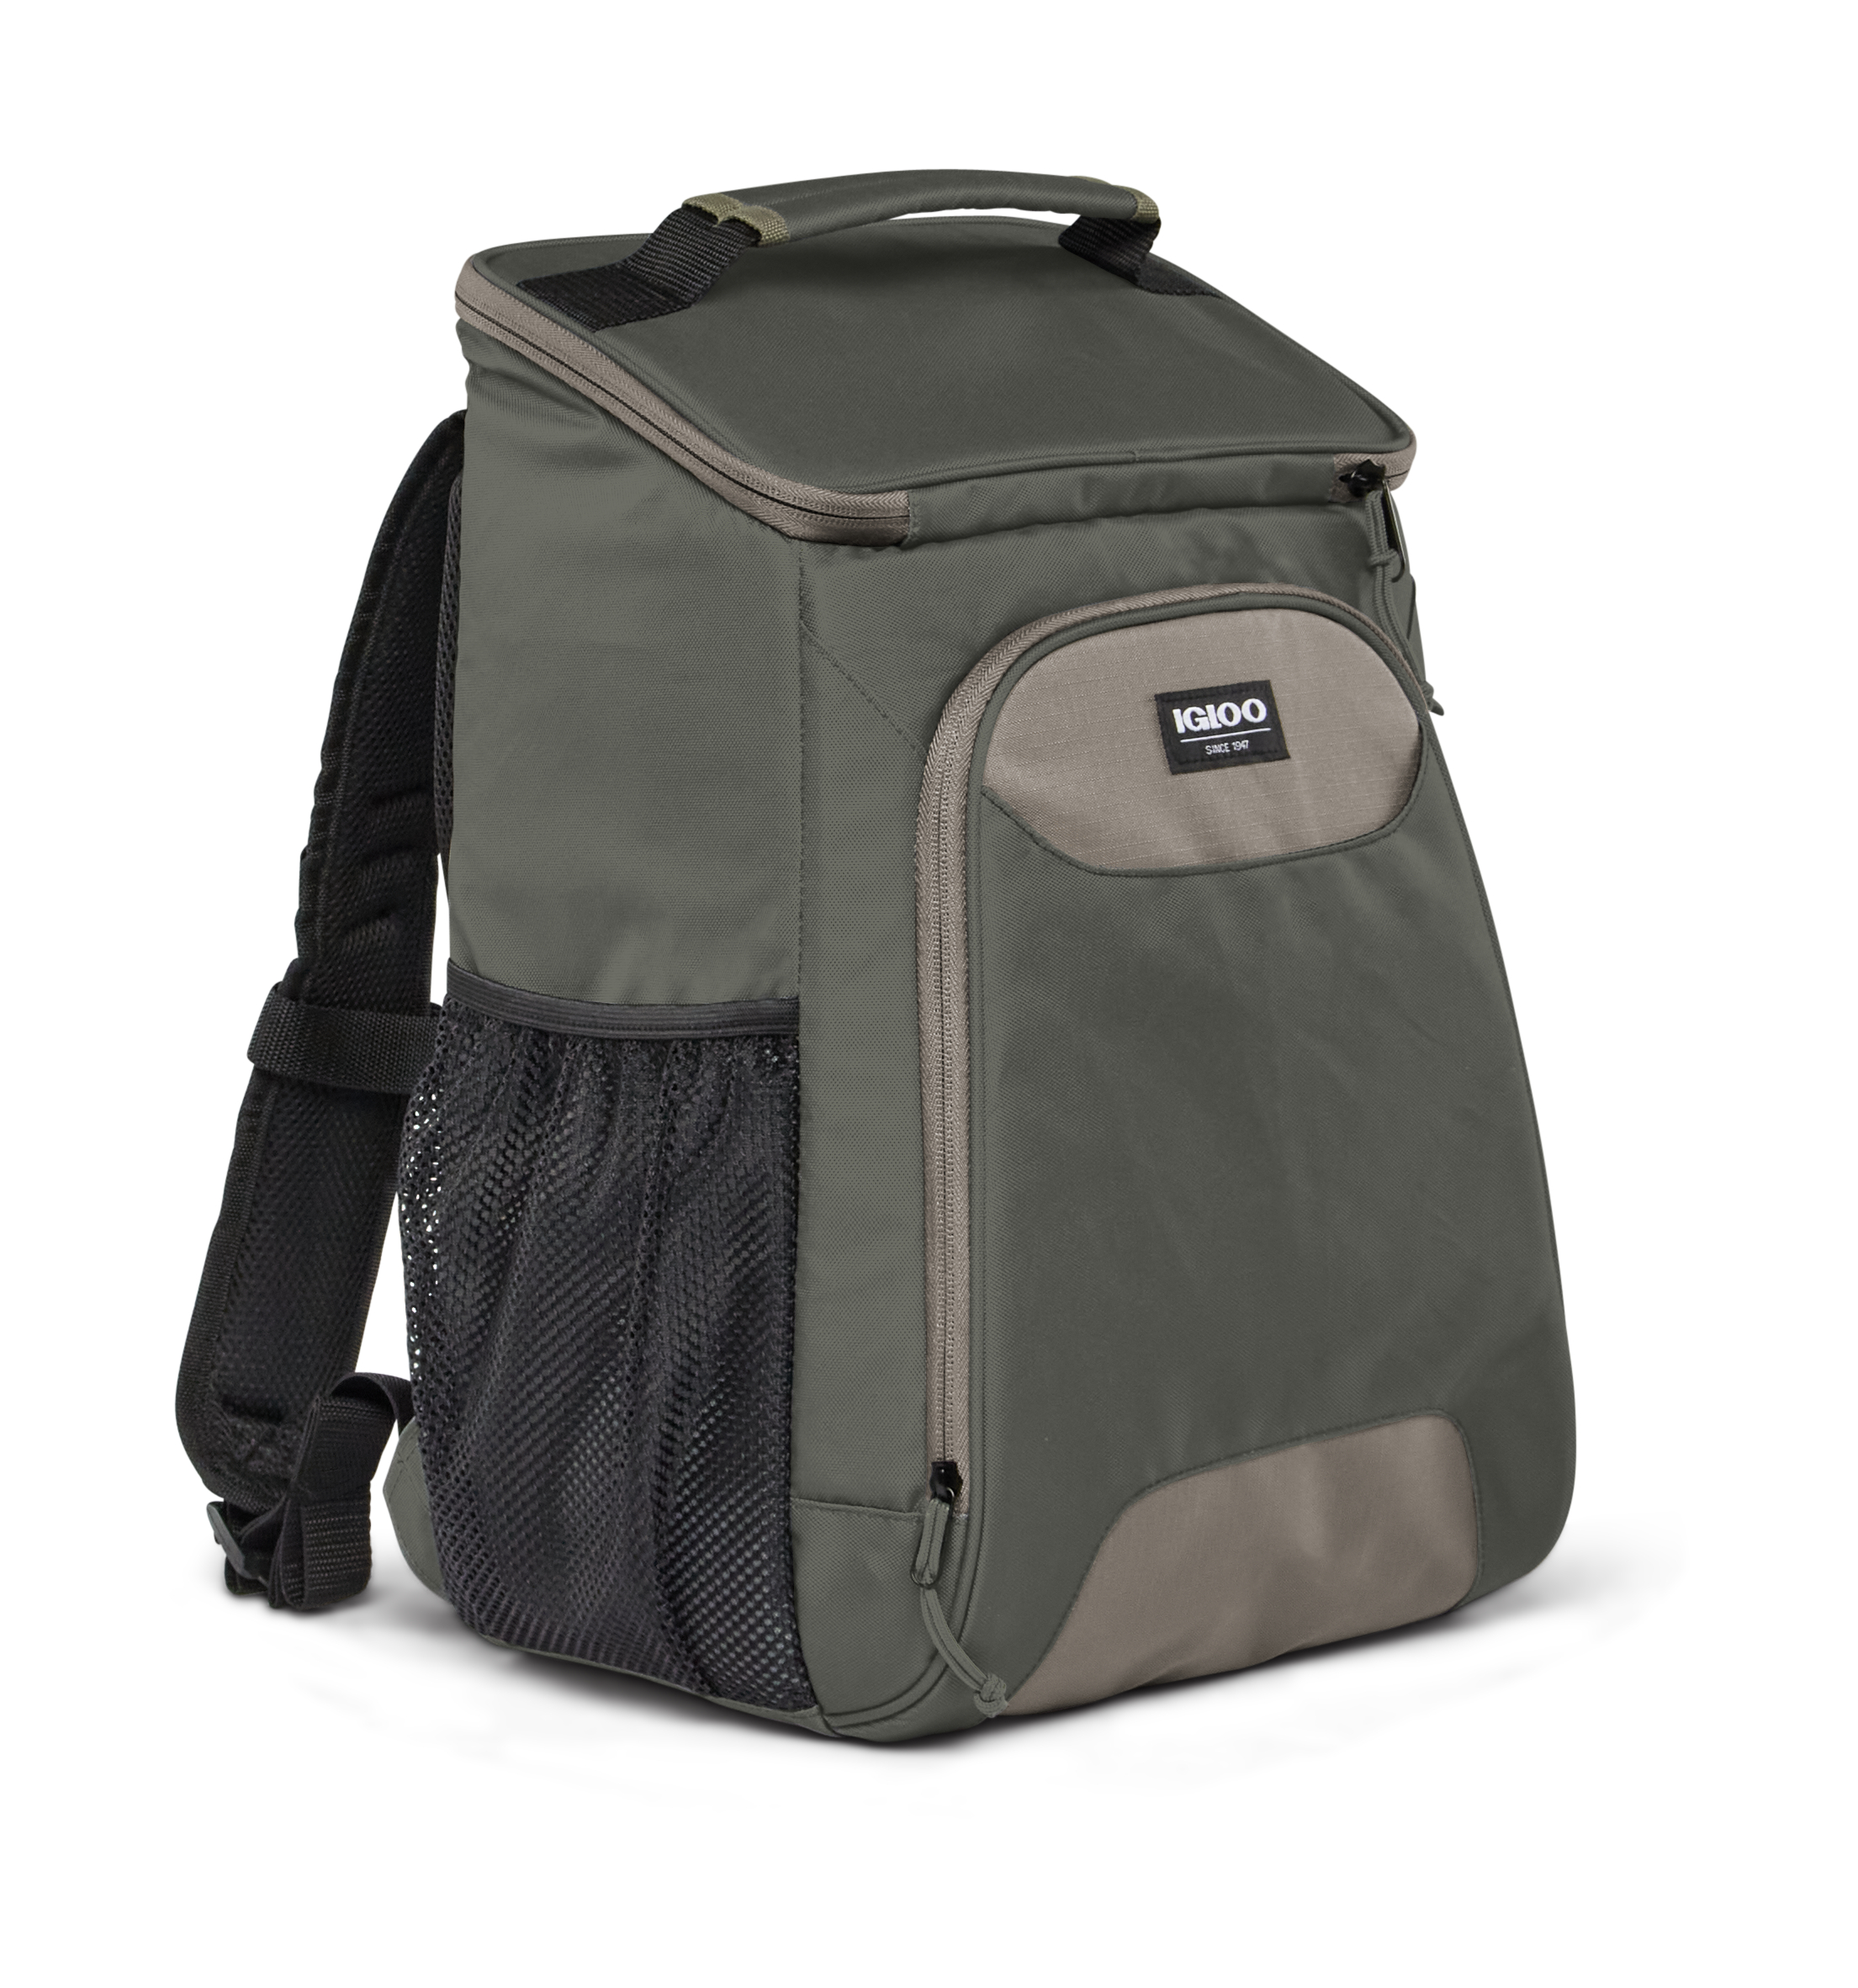 Igloo 24 cans Topgrip Soft Sided Cooler Backpack, Green - image 3 of 9